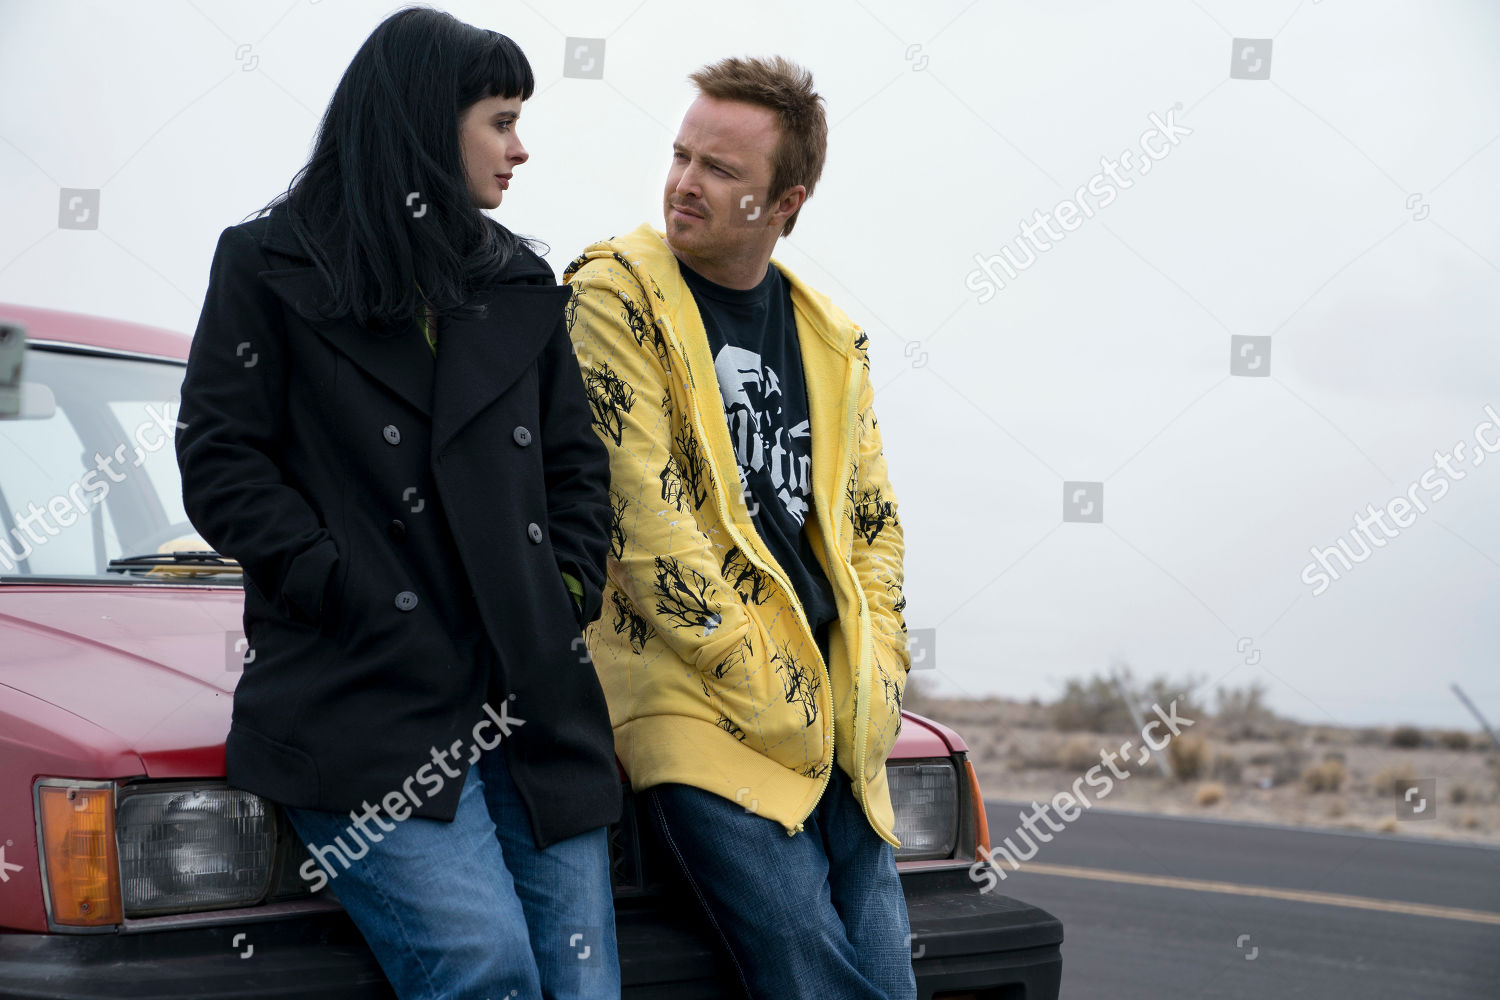 breaking bad jesse and jane